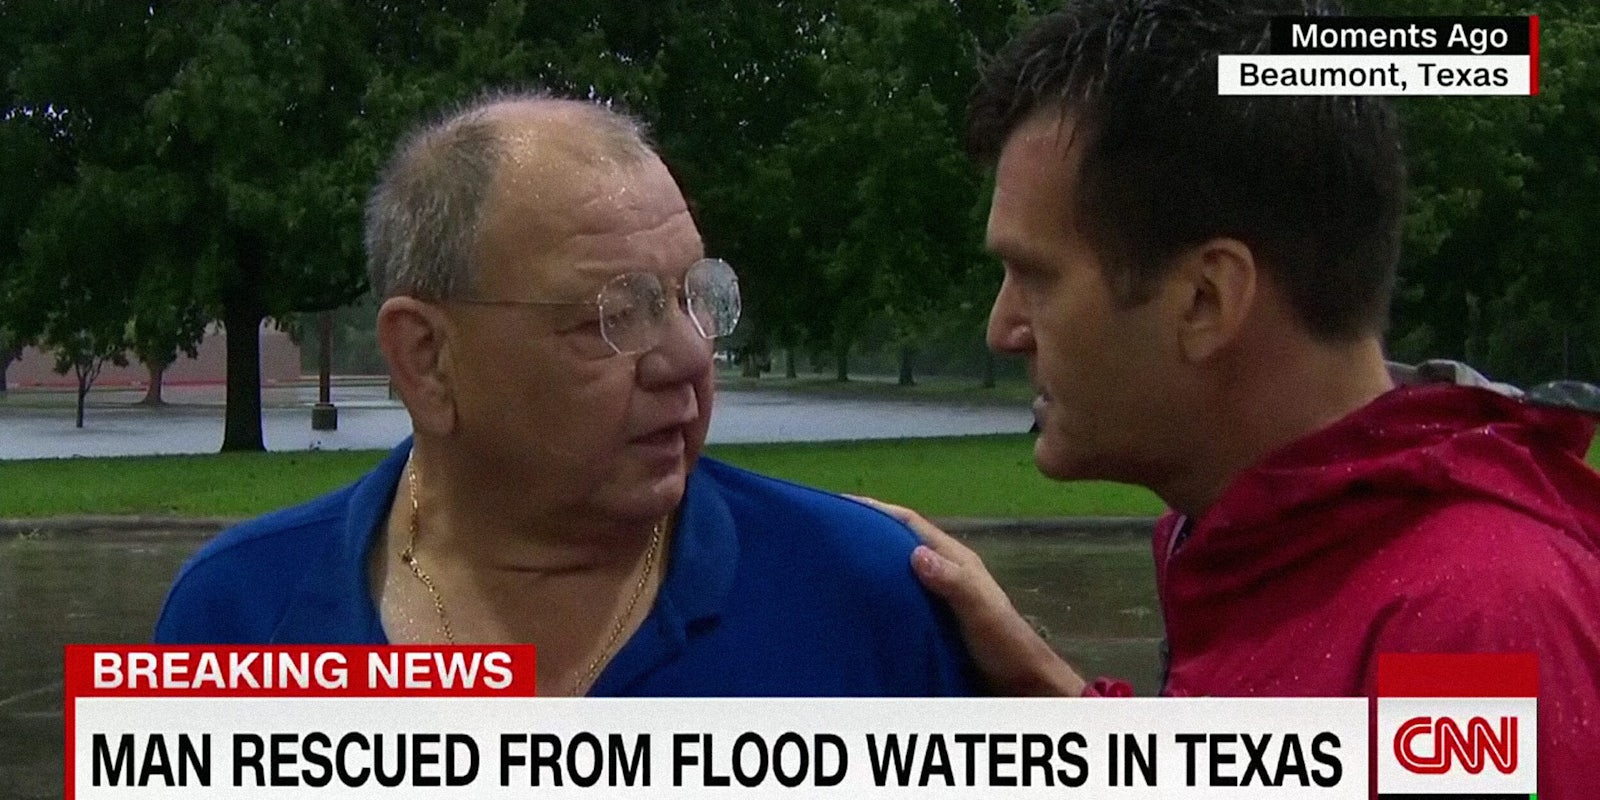 Man rescued from flood by CNN crew